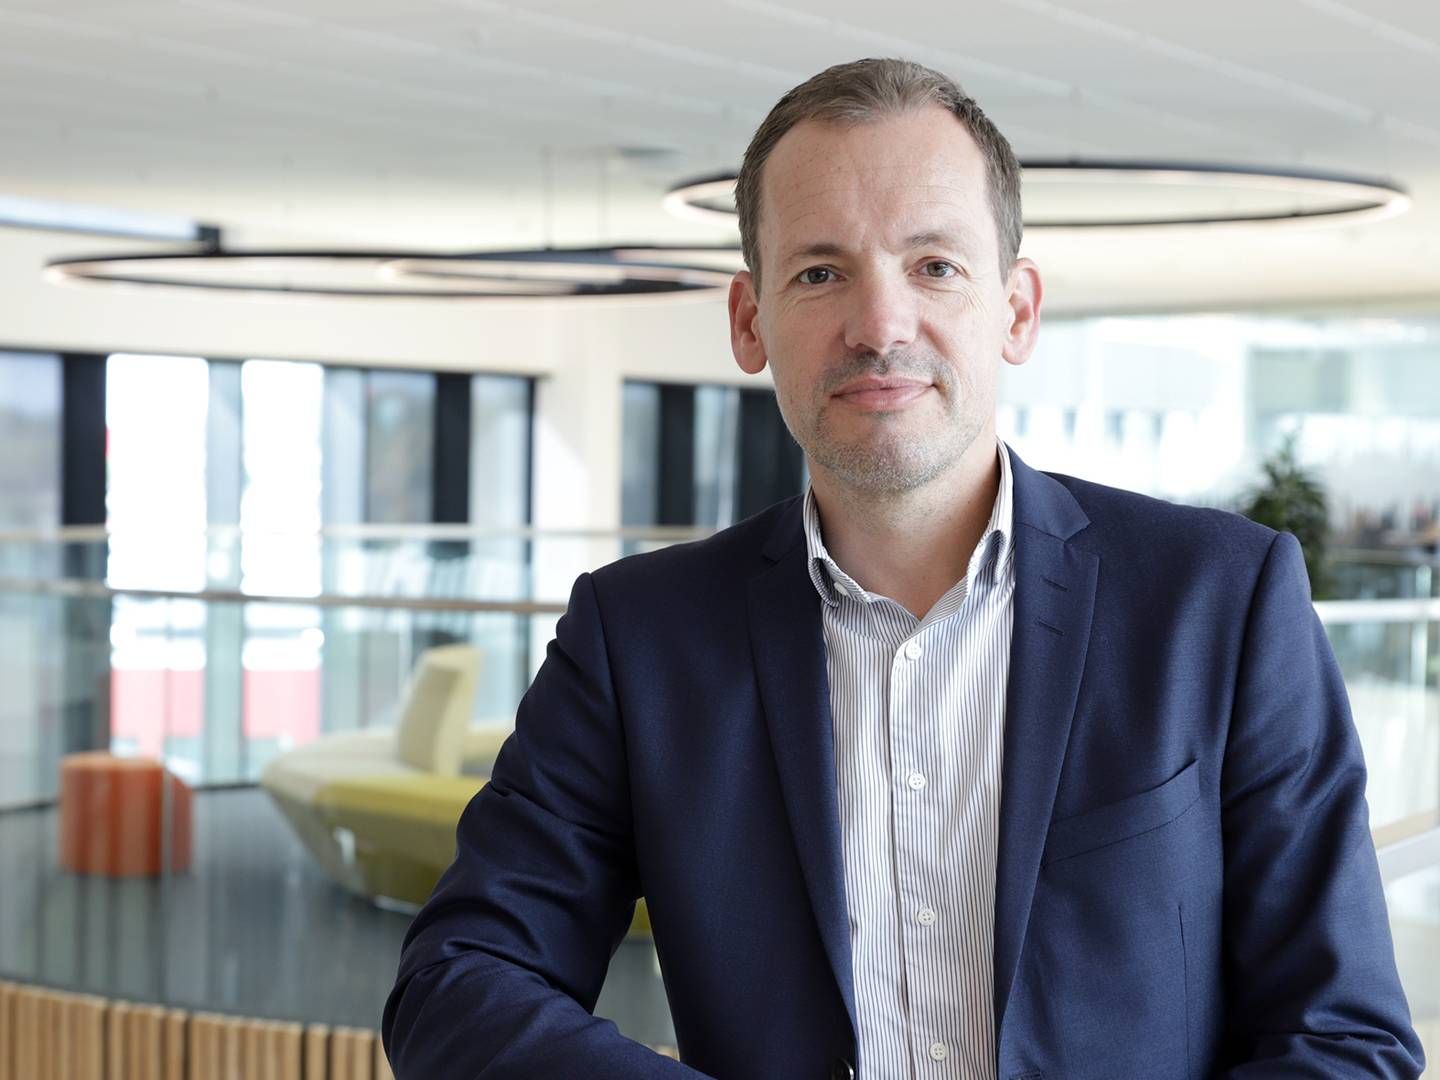 Villads Thomsen took over as the new CEO of Interacoustics in February, having spent the last nine years as CEO of Lyngsoe Systems. Before that, Interacoustics had been through a turbulent period when Thomsen's predecessor was fired.